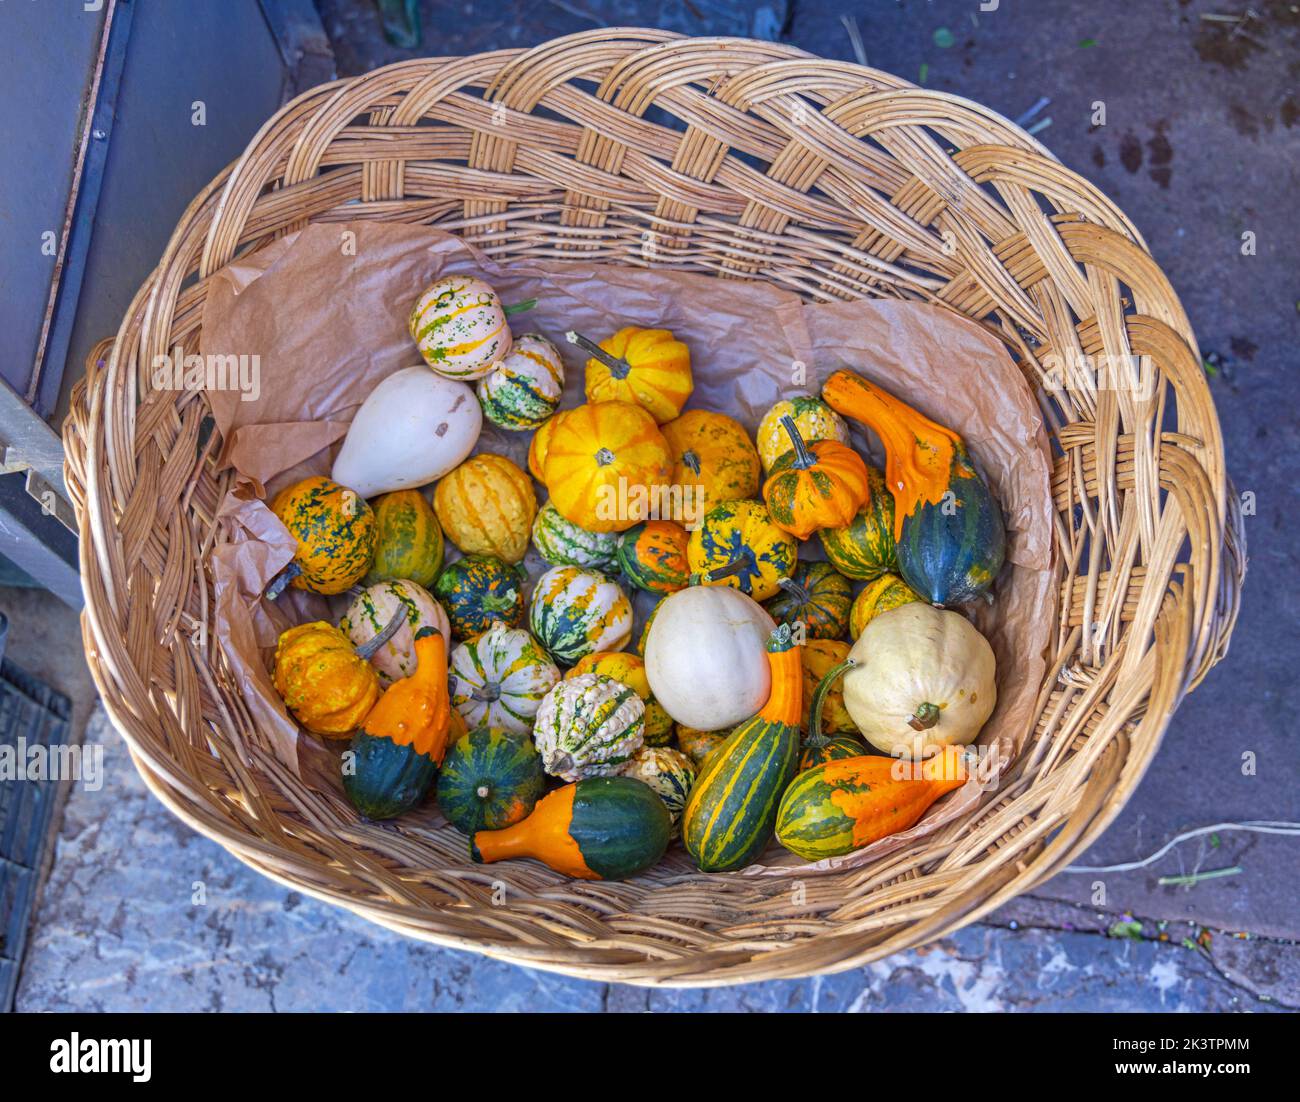 Many Miniature Gourds and Pumpkins Produce in Basket Stock Photo